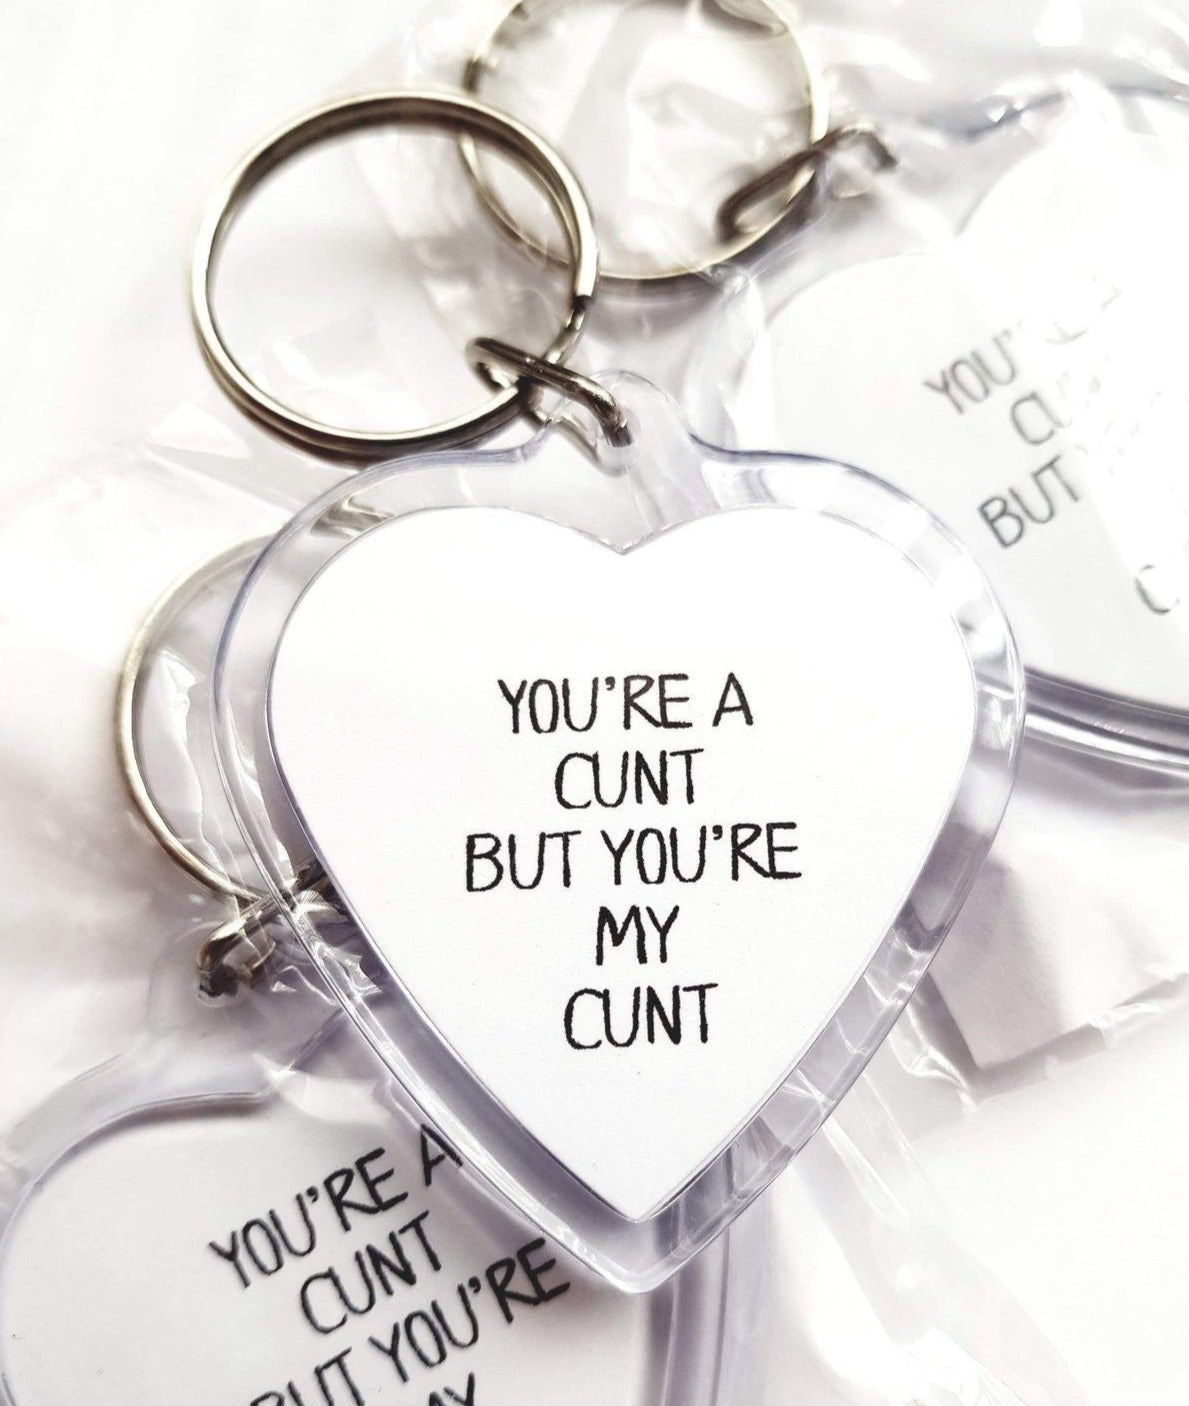 Acrylic heart keyring featuring the funny design 'you're a c*nt, but you'r my c*nt'.